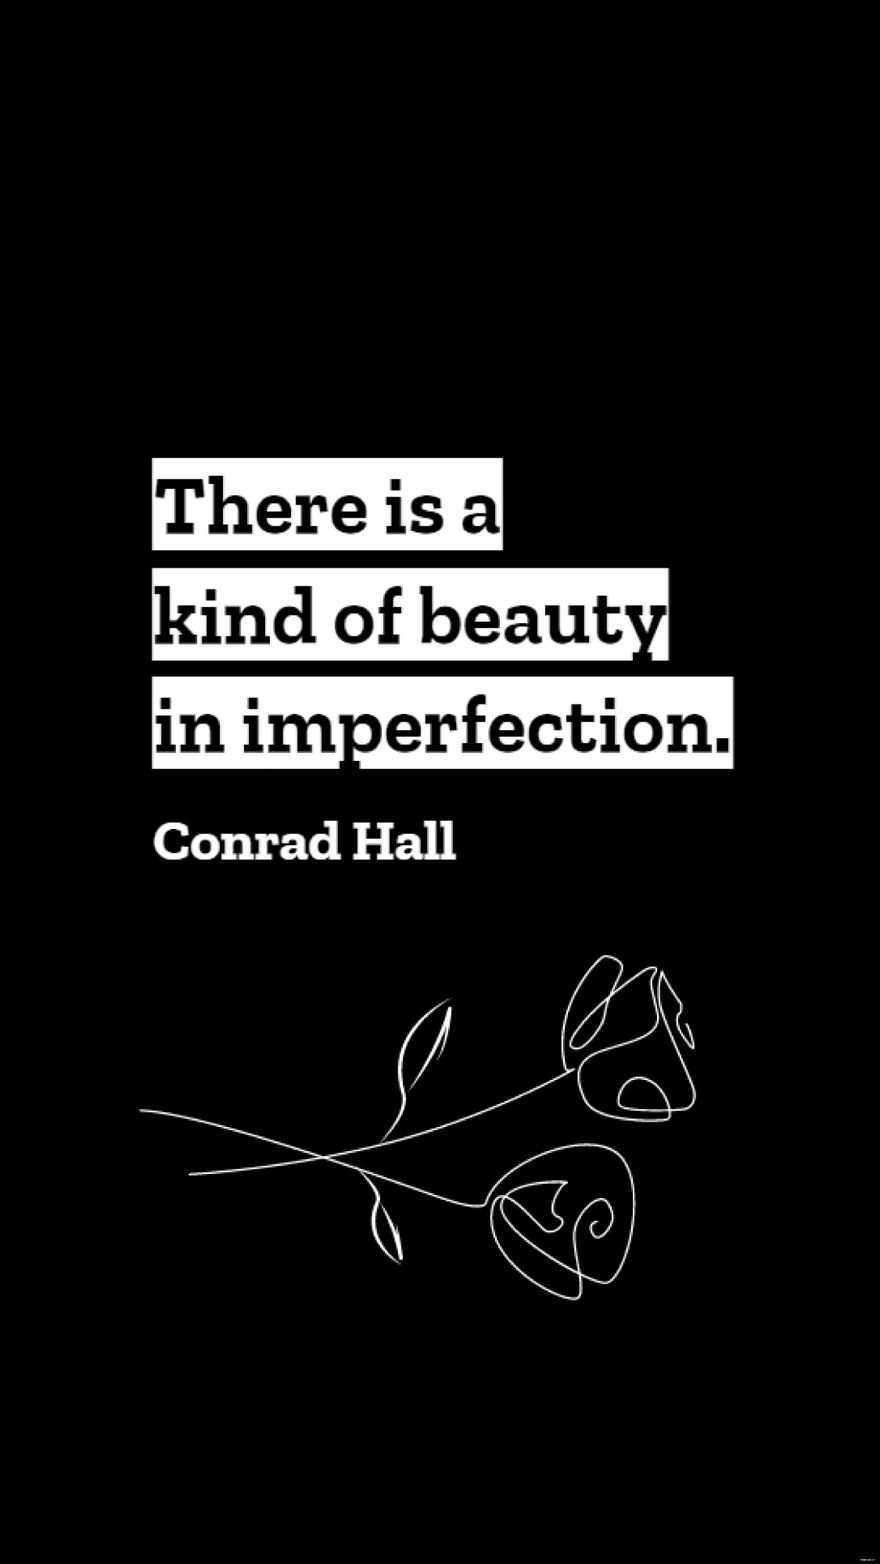 Conrad Hall - There is a kind of beauty in imperfection. in JPG